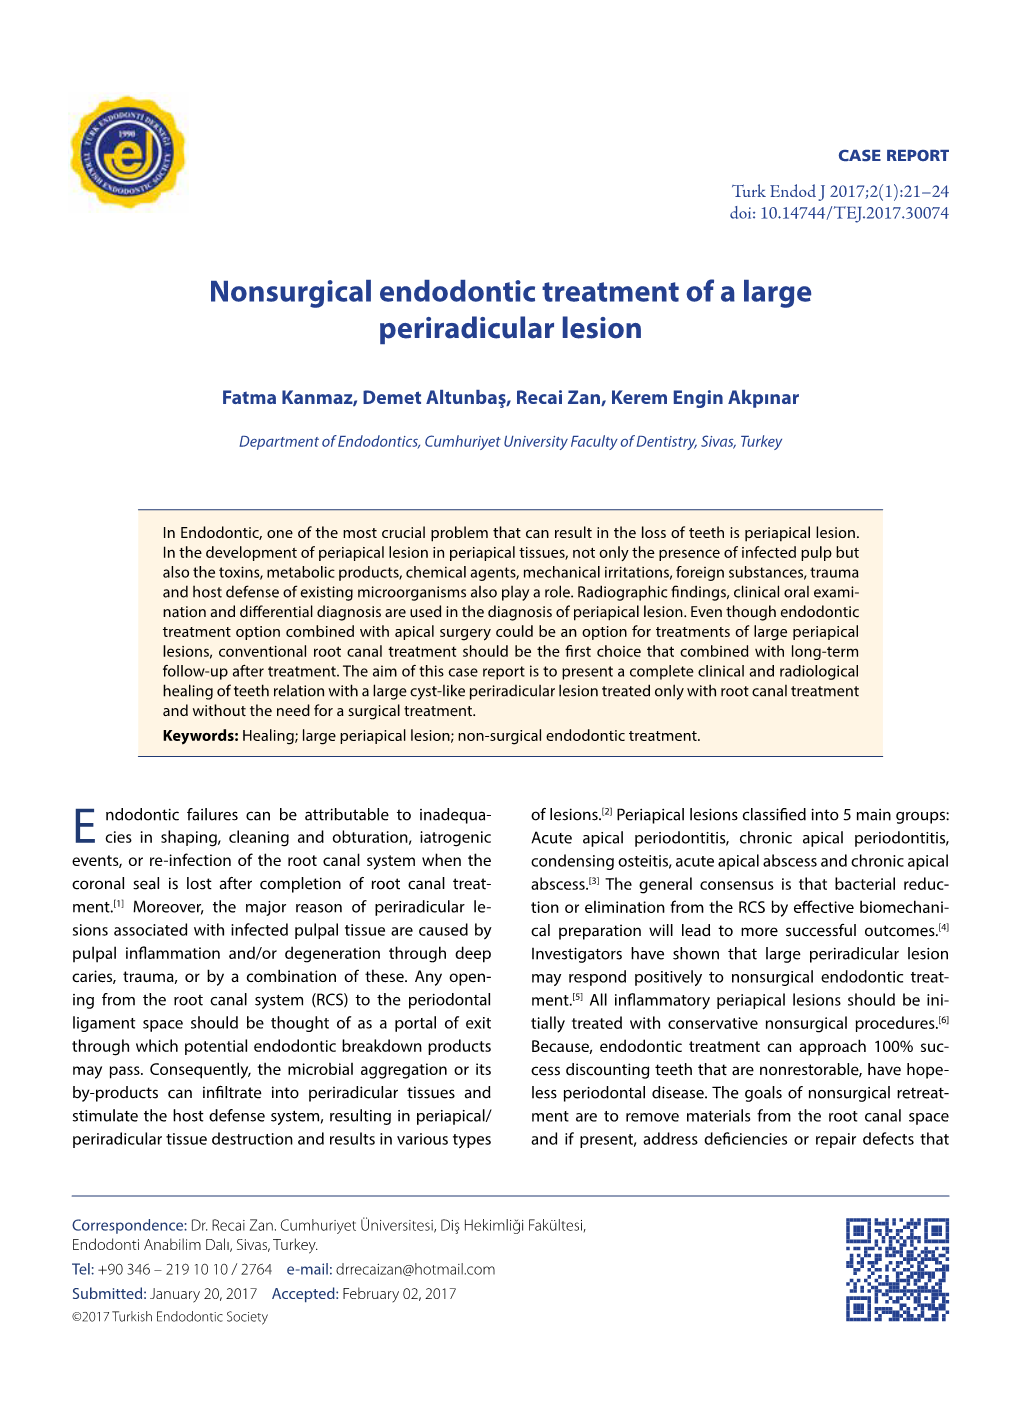 Nonsurgical Endodontic Treatment of a Large Periradicular Lesion